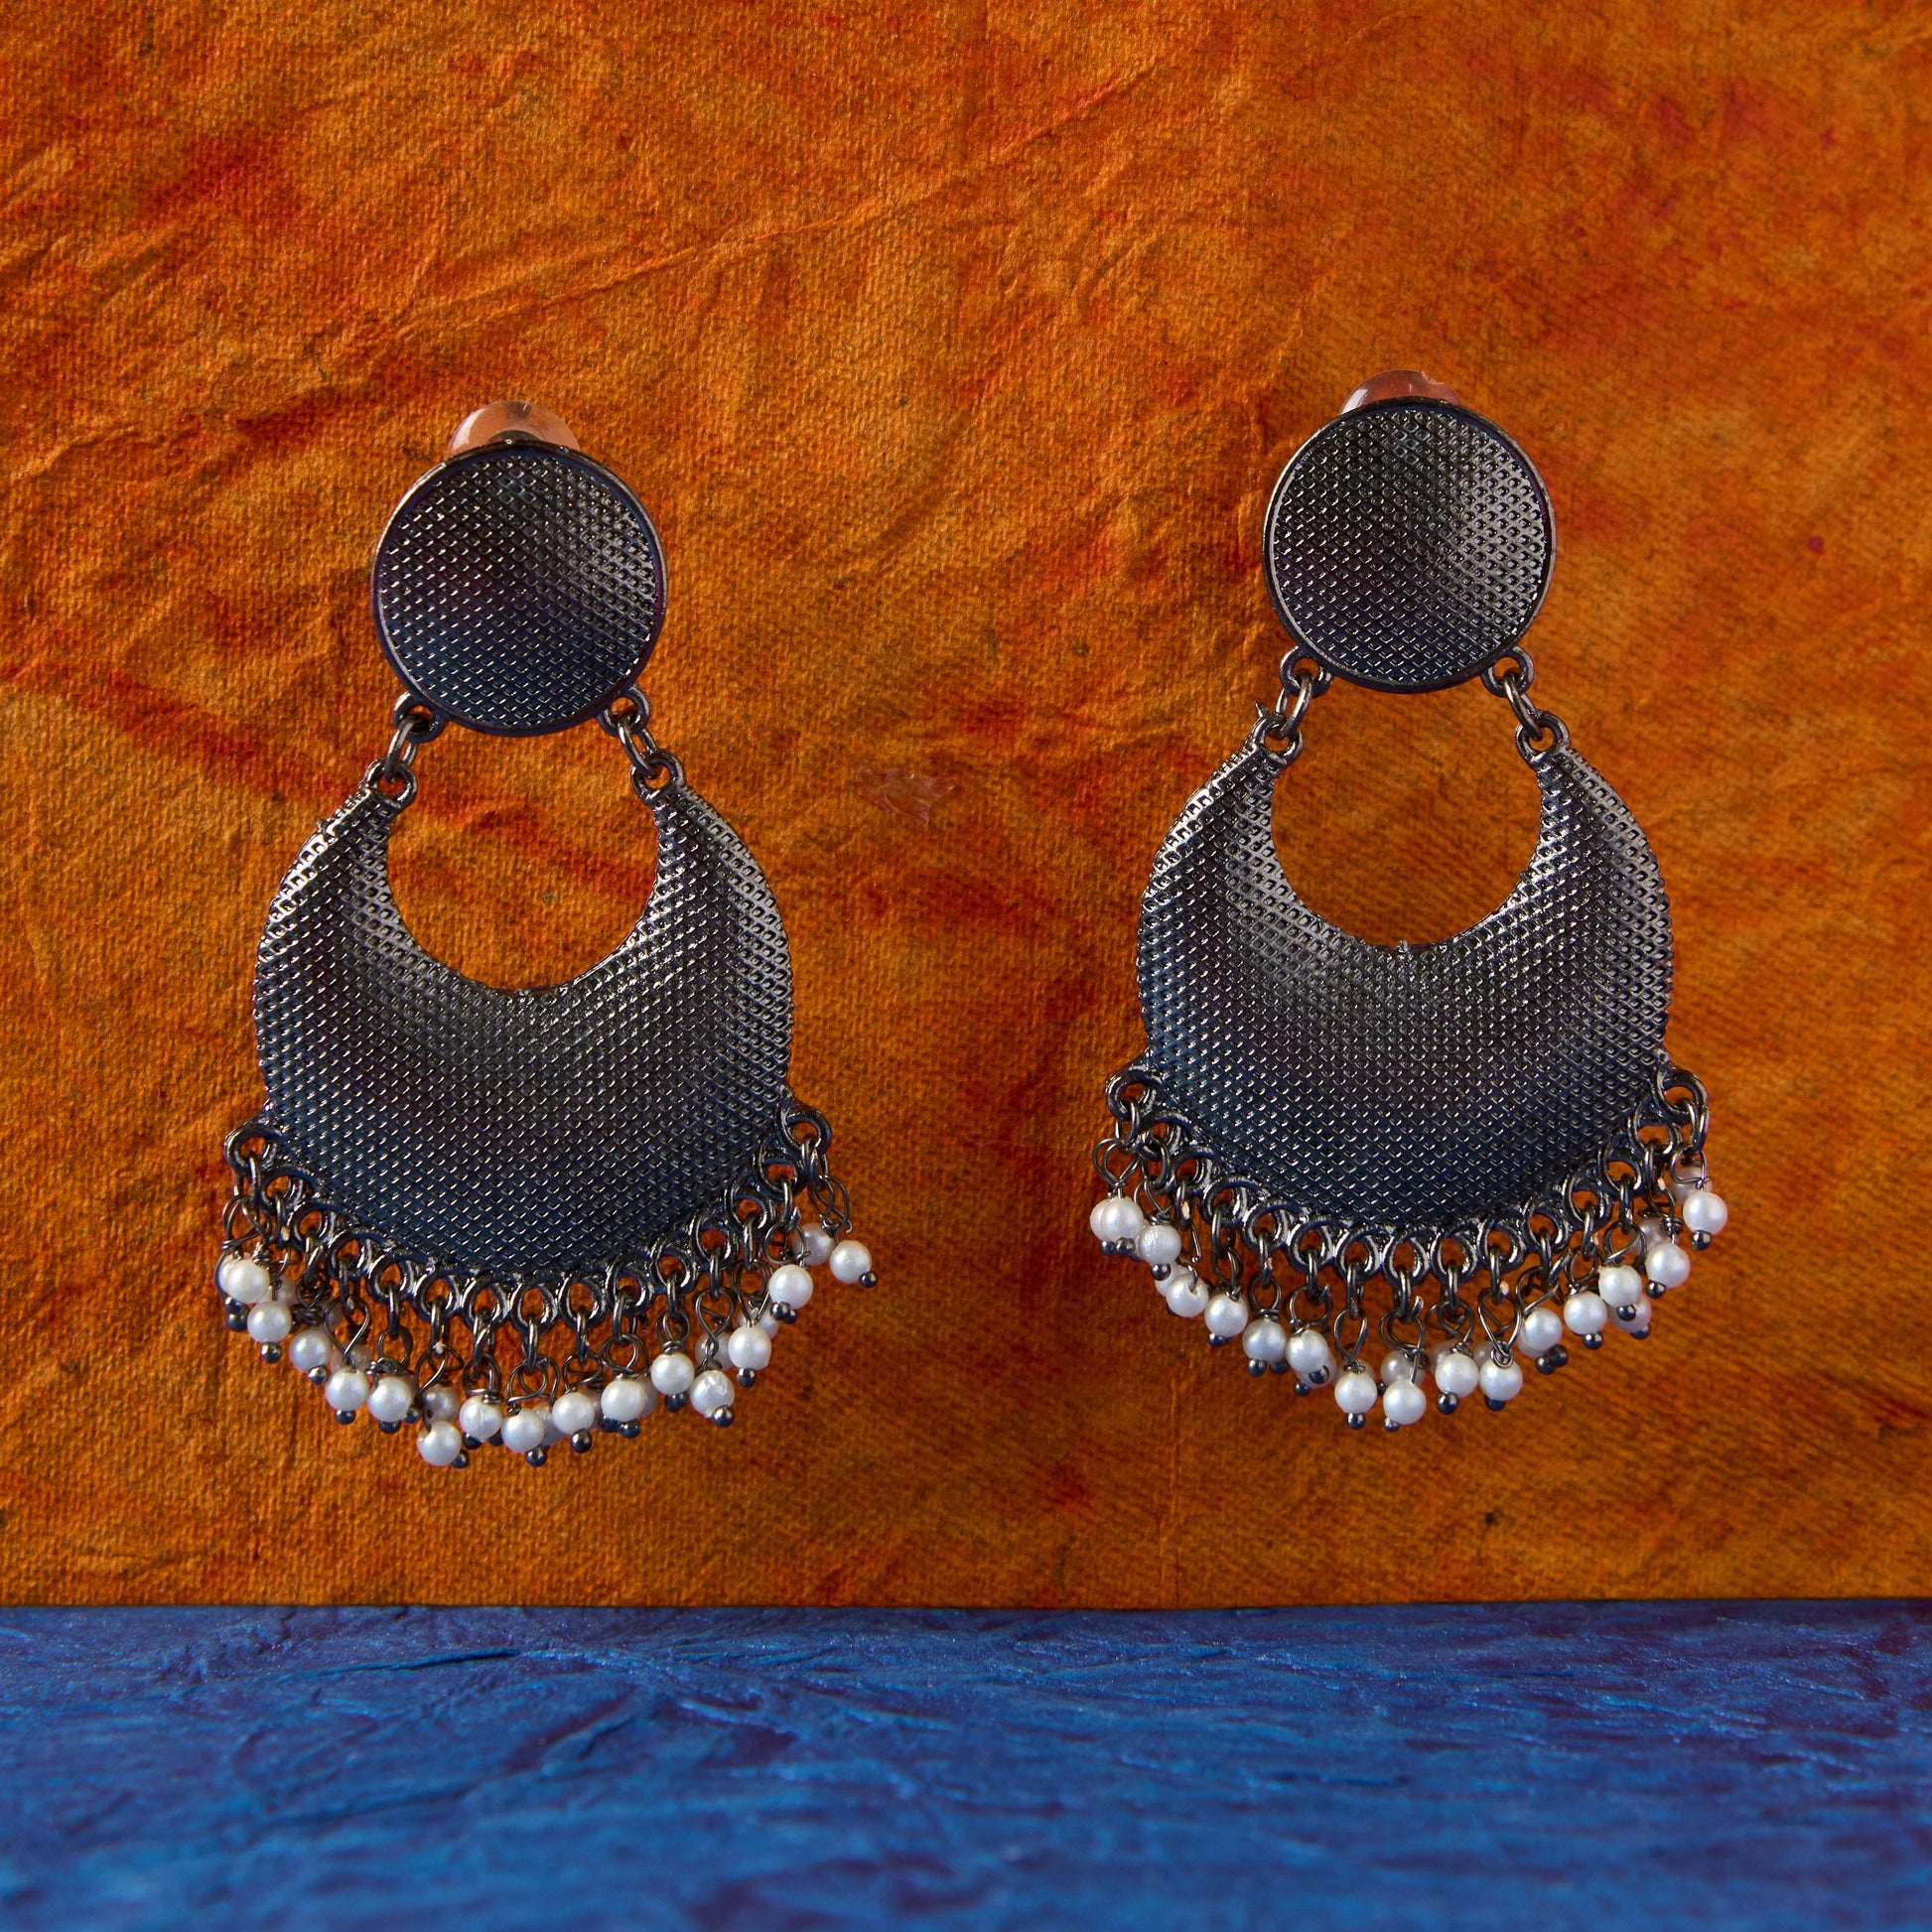 Moonstruck Antique Silver Oxidized Lightweight Traditional Stylish Indian Bollywood Chandbali Dangle Earrings with Pearls for Women - www.MoonstruckINC.com